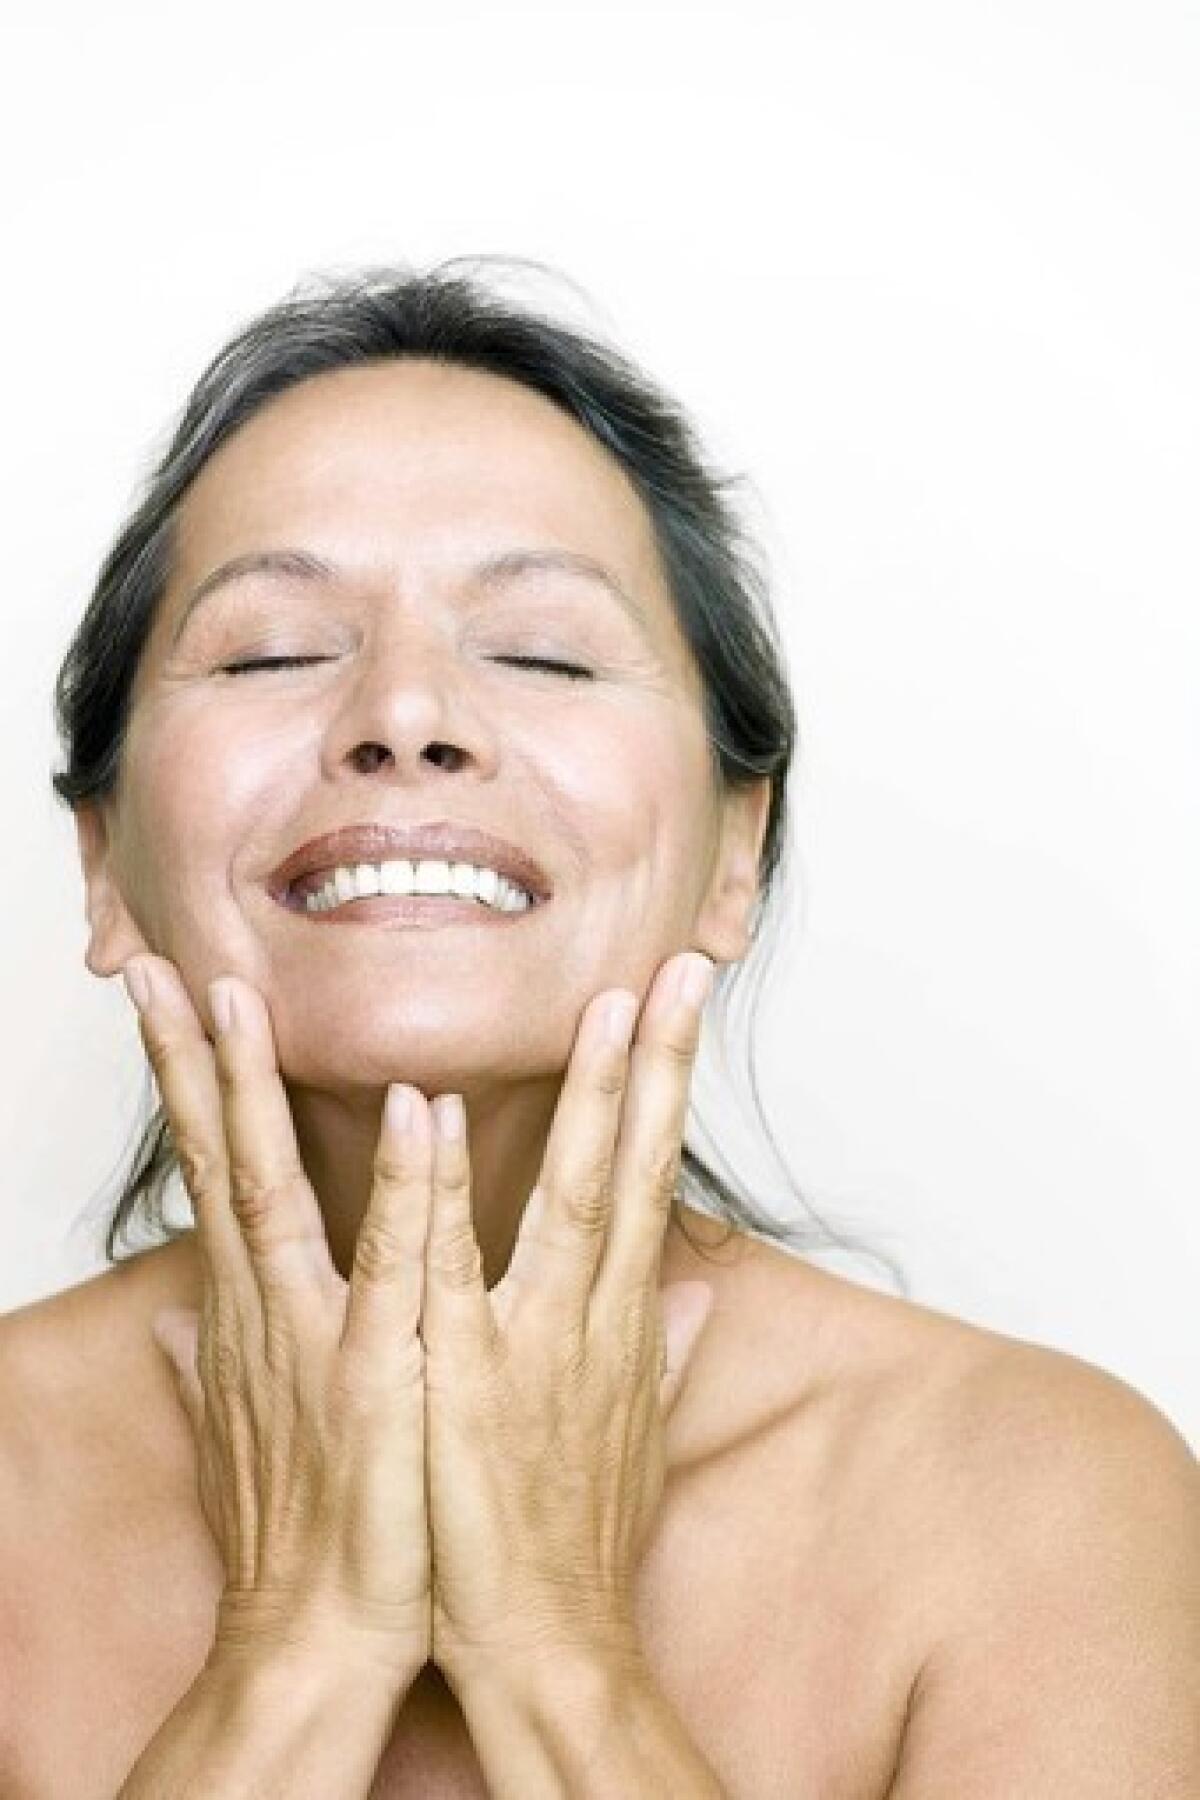 There's an ideal skin-care regimen for every age.